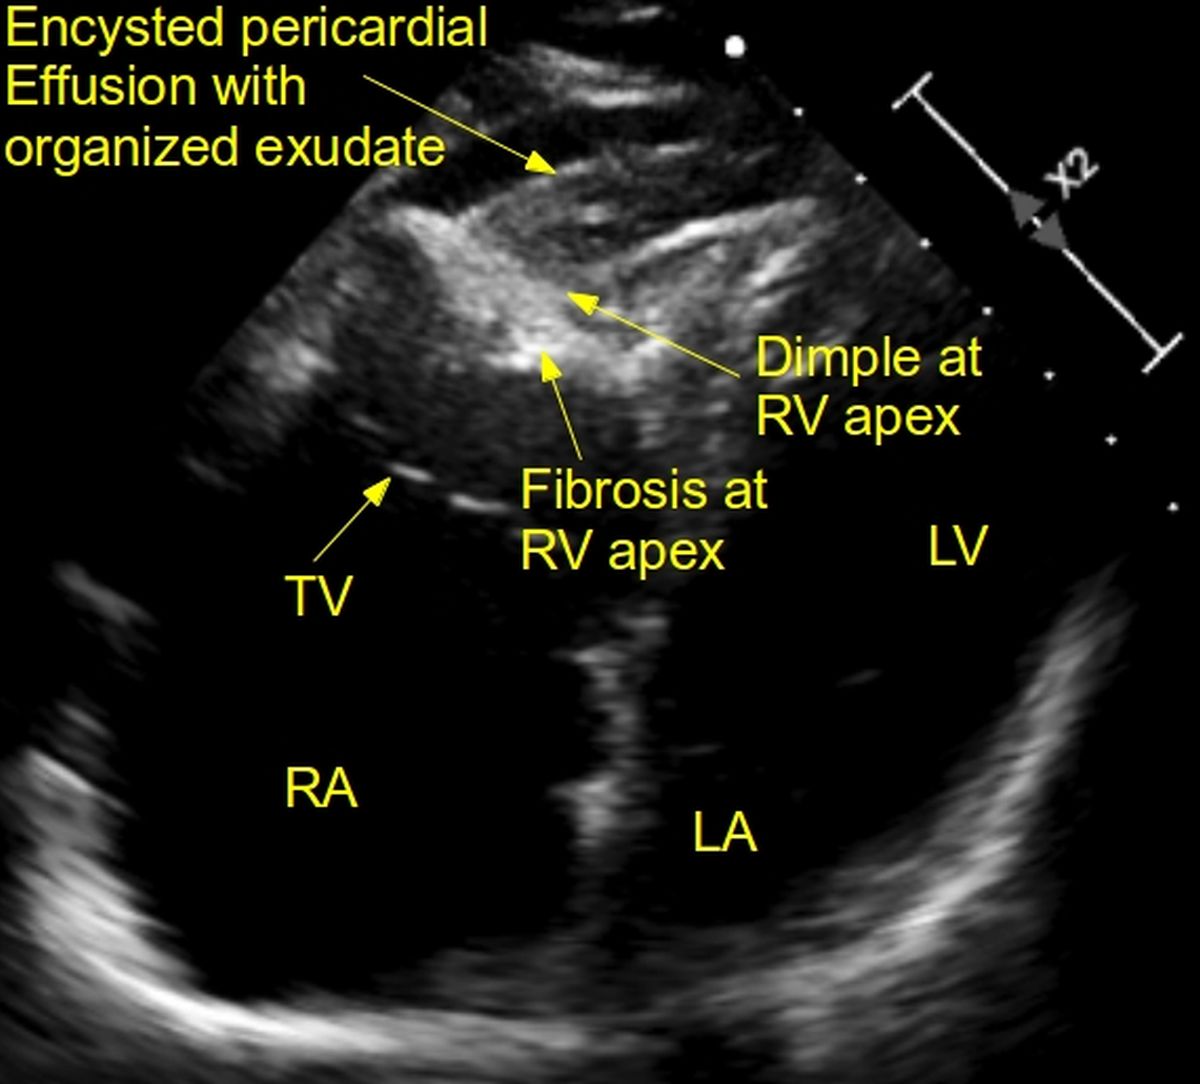 Multiple echo views in EMF - RV apical dimple & fibrosis